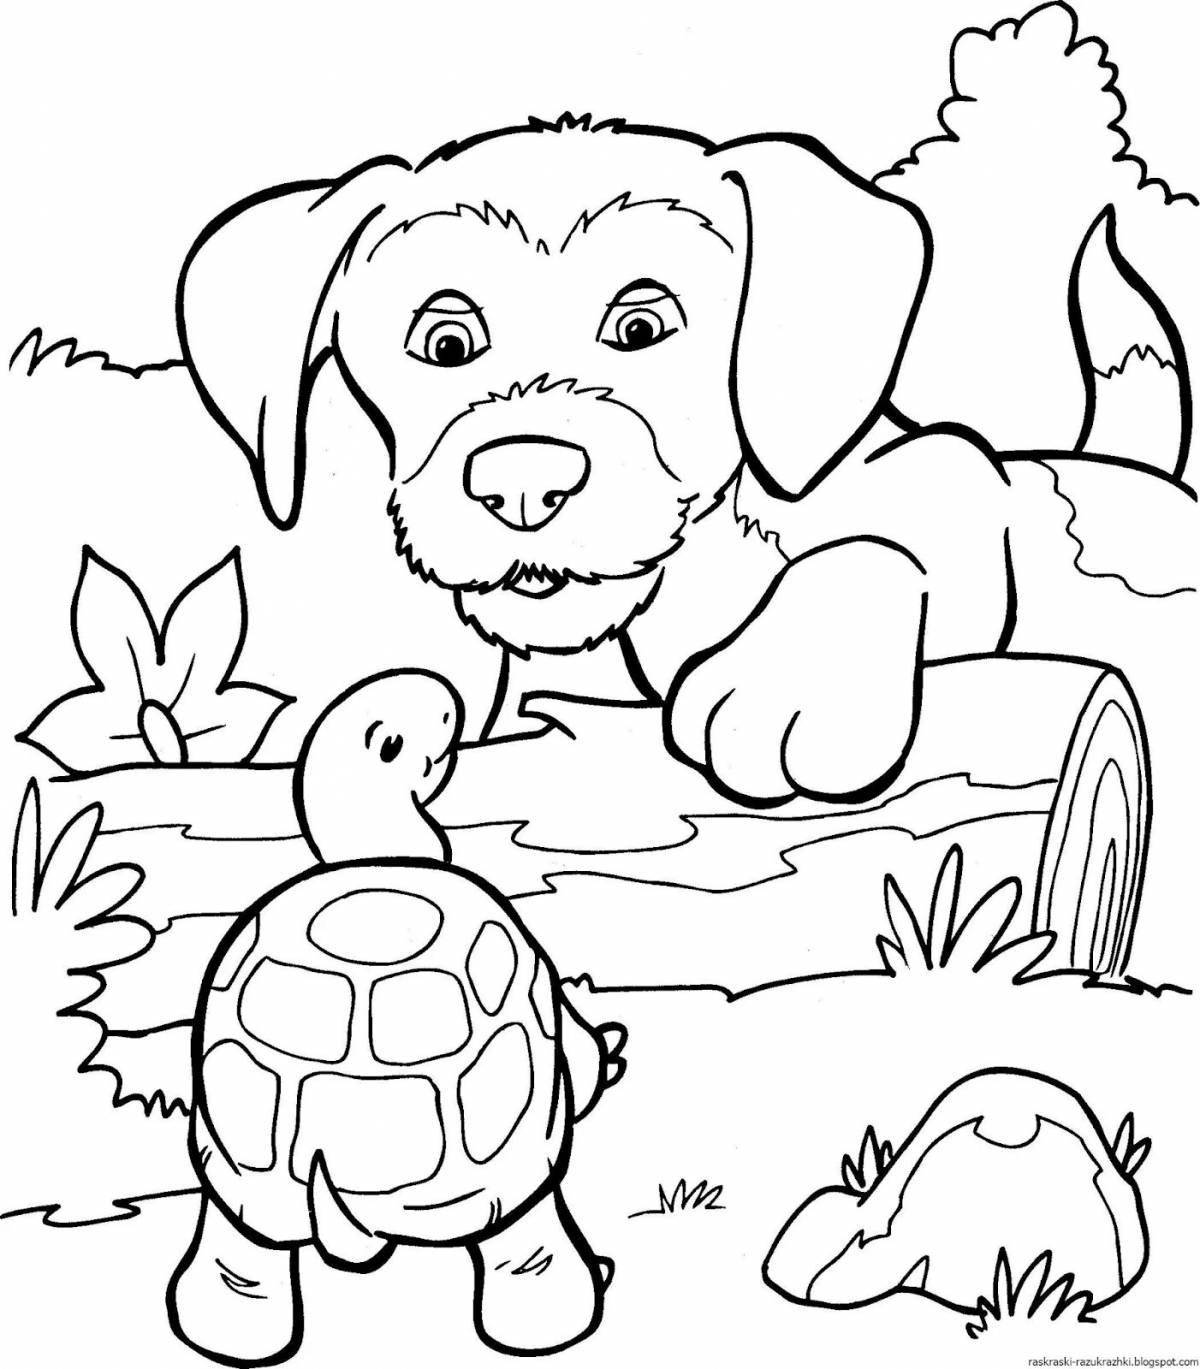 Snuggly dog ​​coloring pages for boys